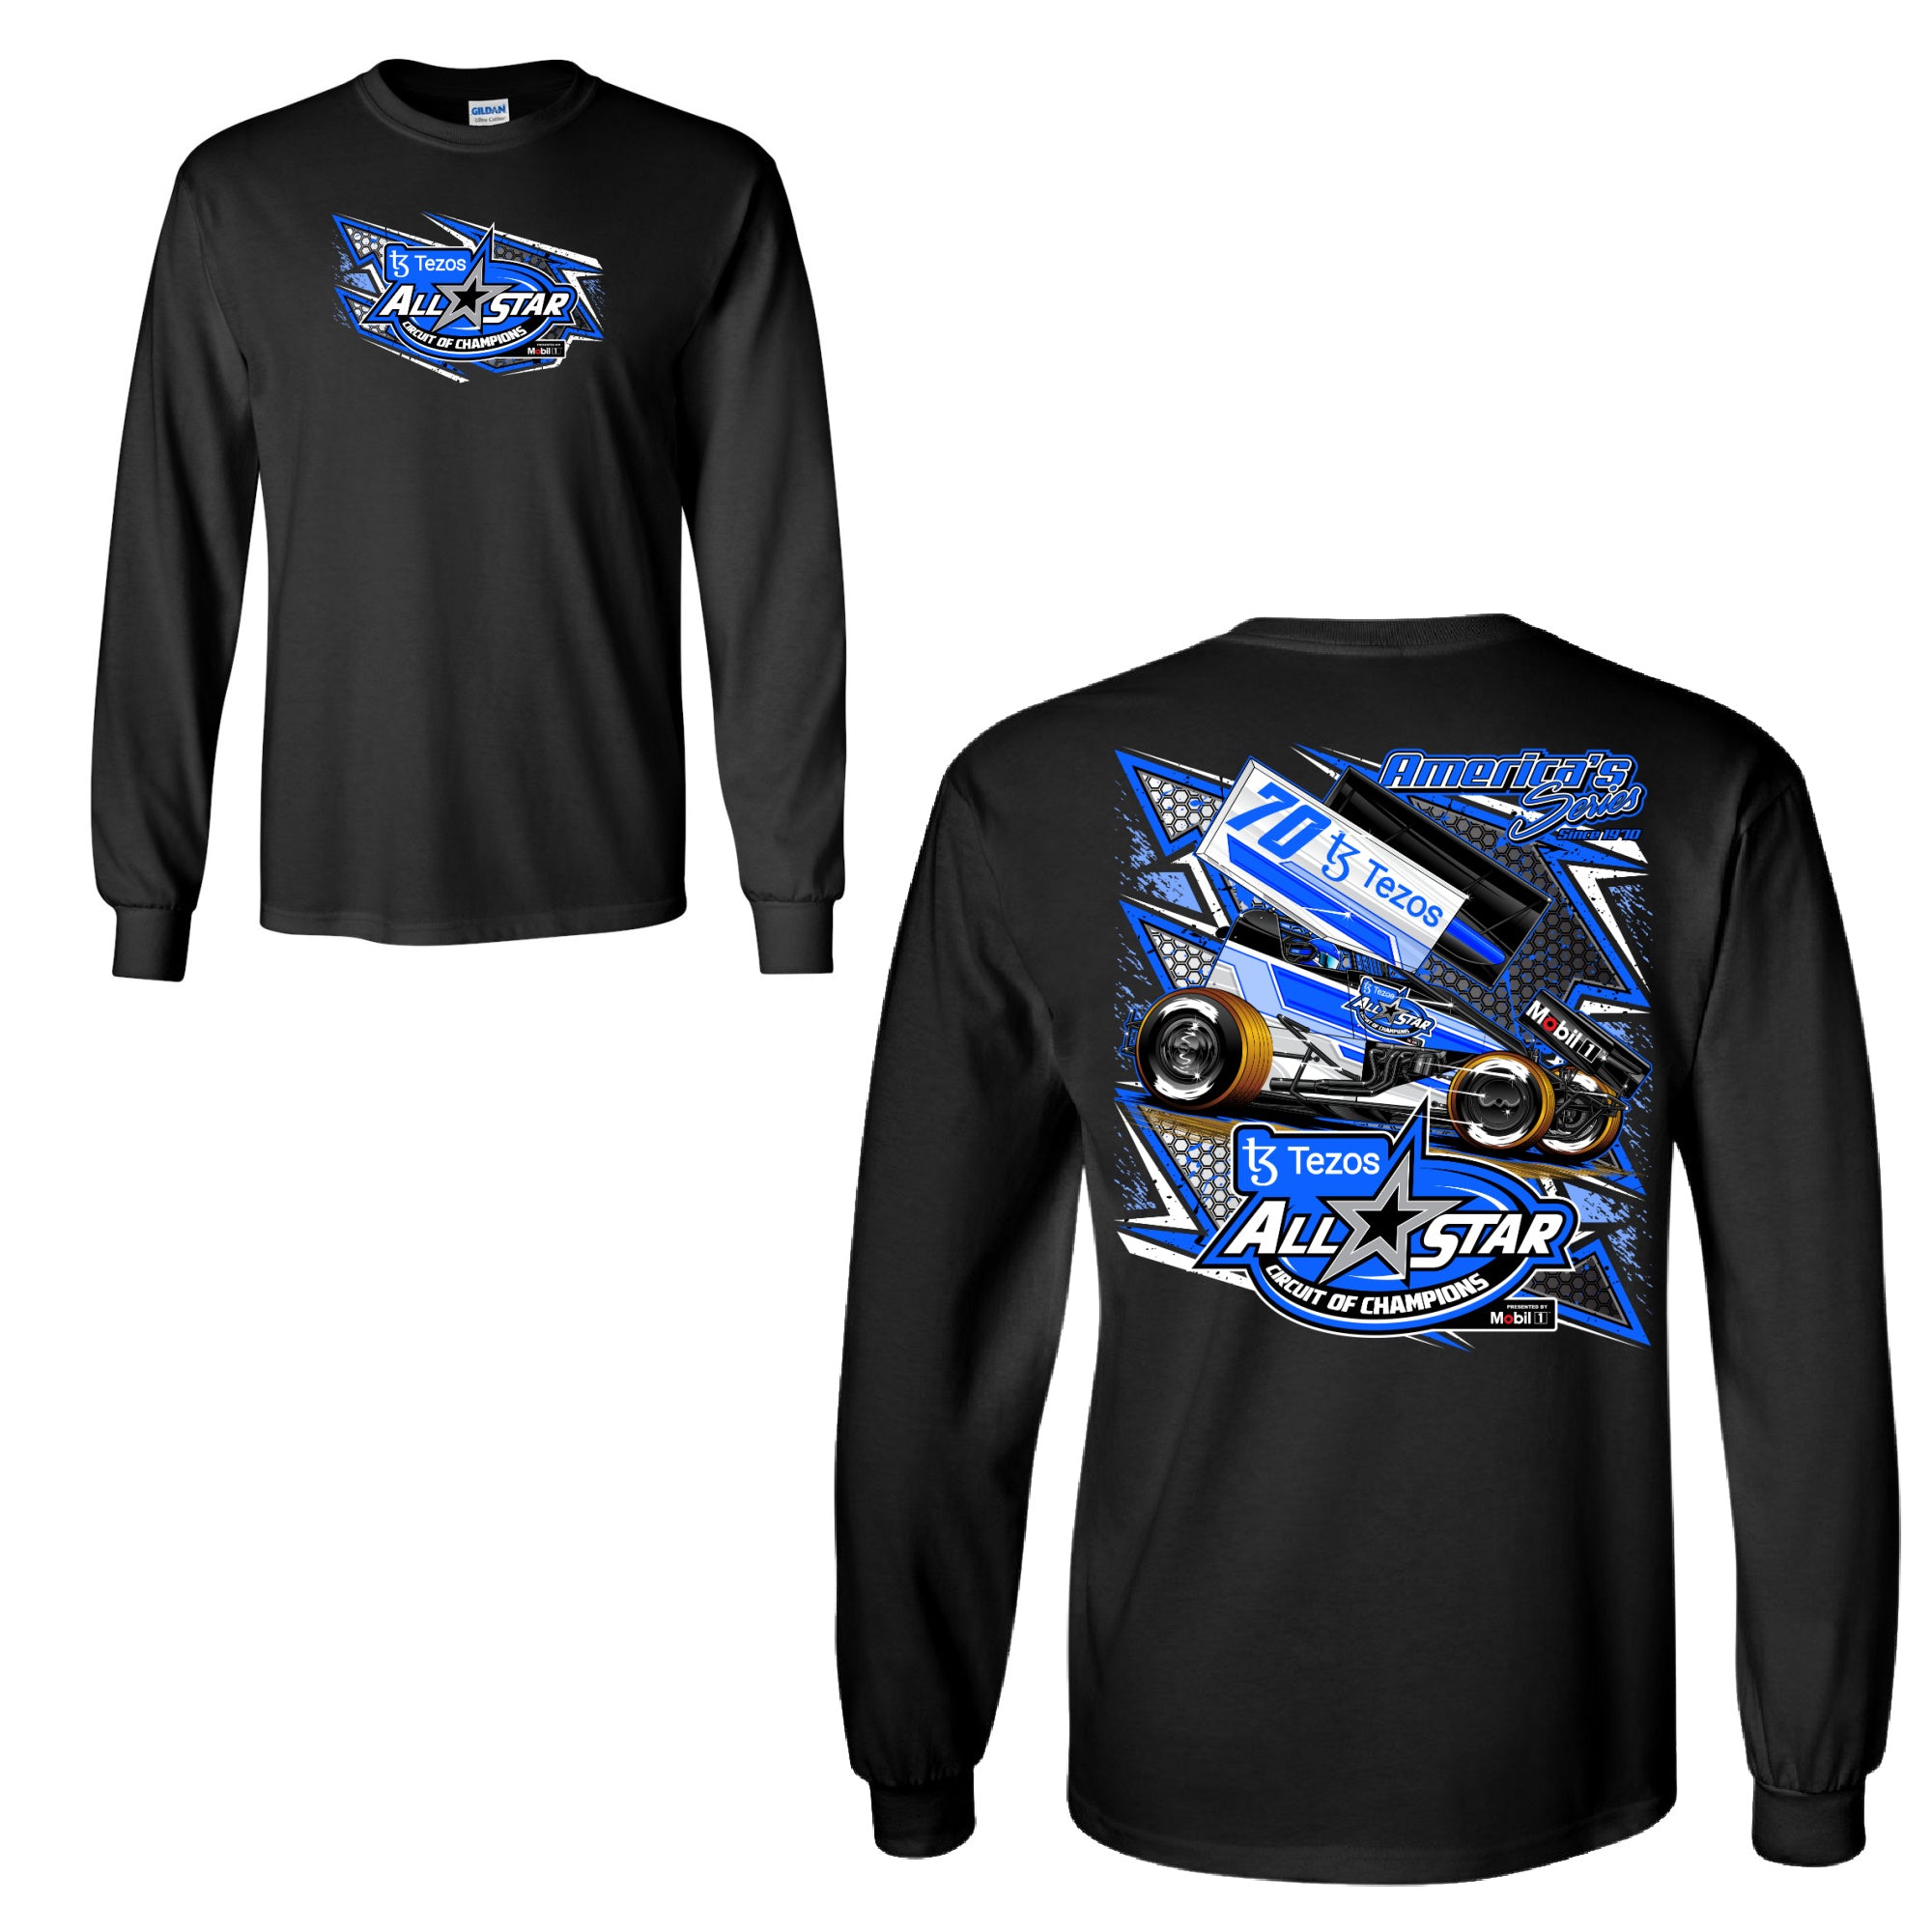 All Star Circuit of Champions Car Design Long Sleeve